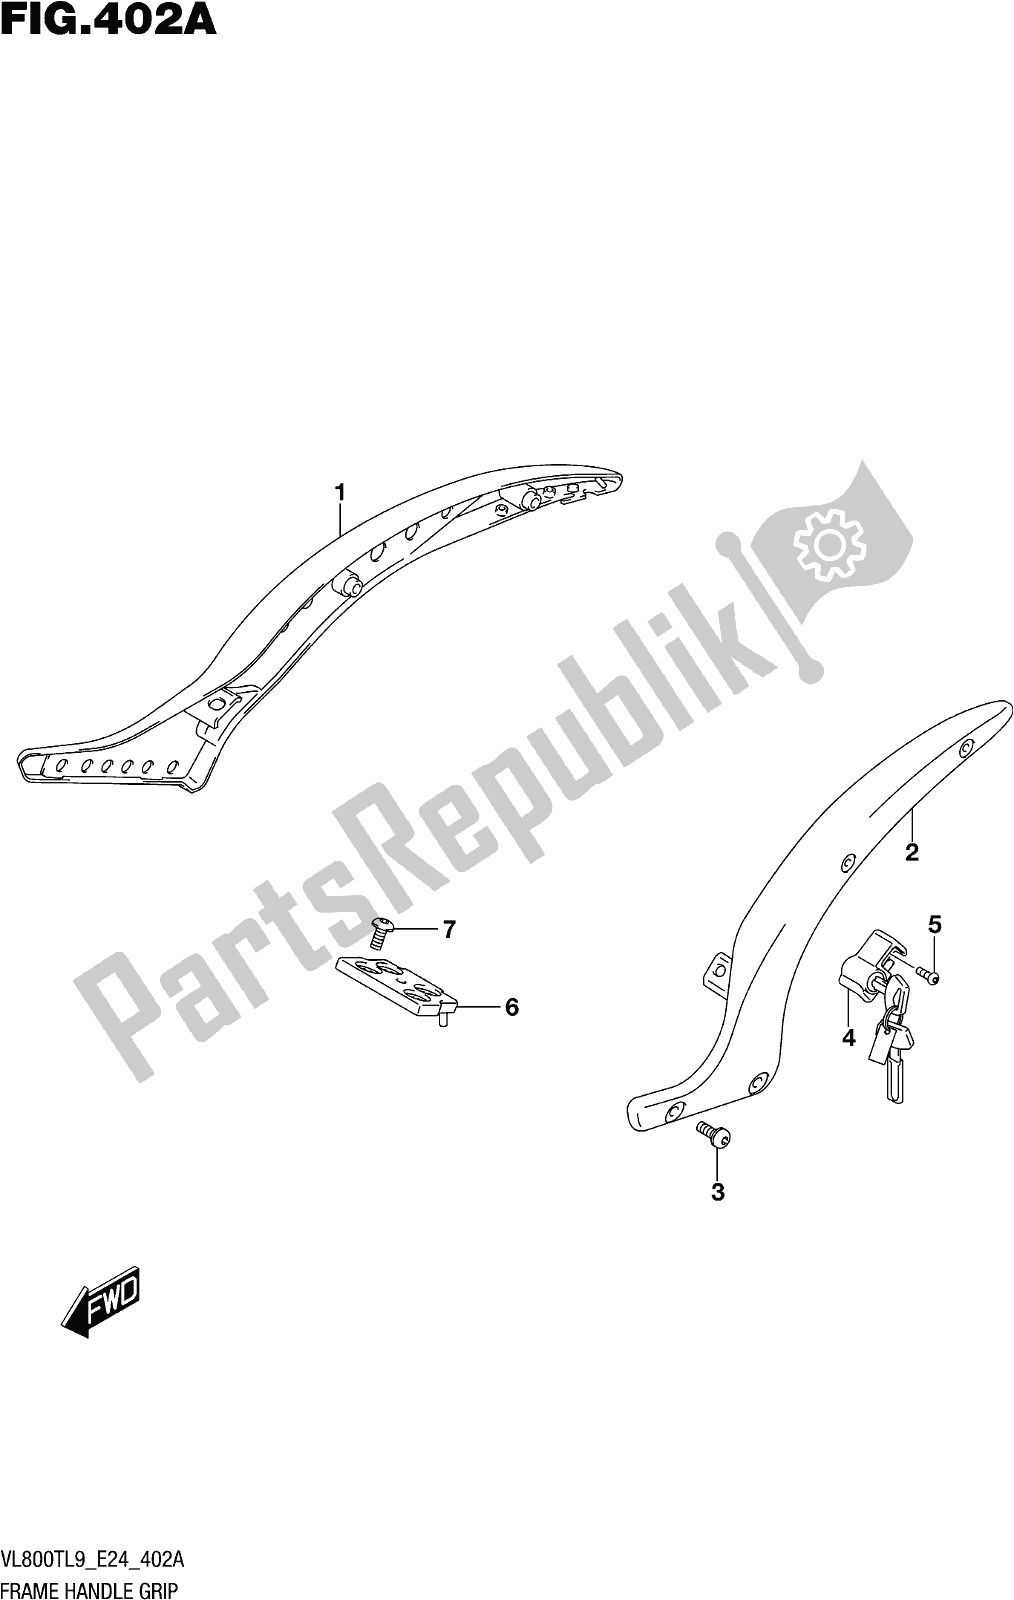 All parts for the Fig. 402a Frame Handle Grip of the Suzuki VL 800T 2019